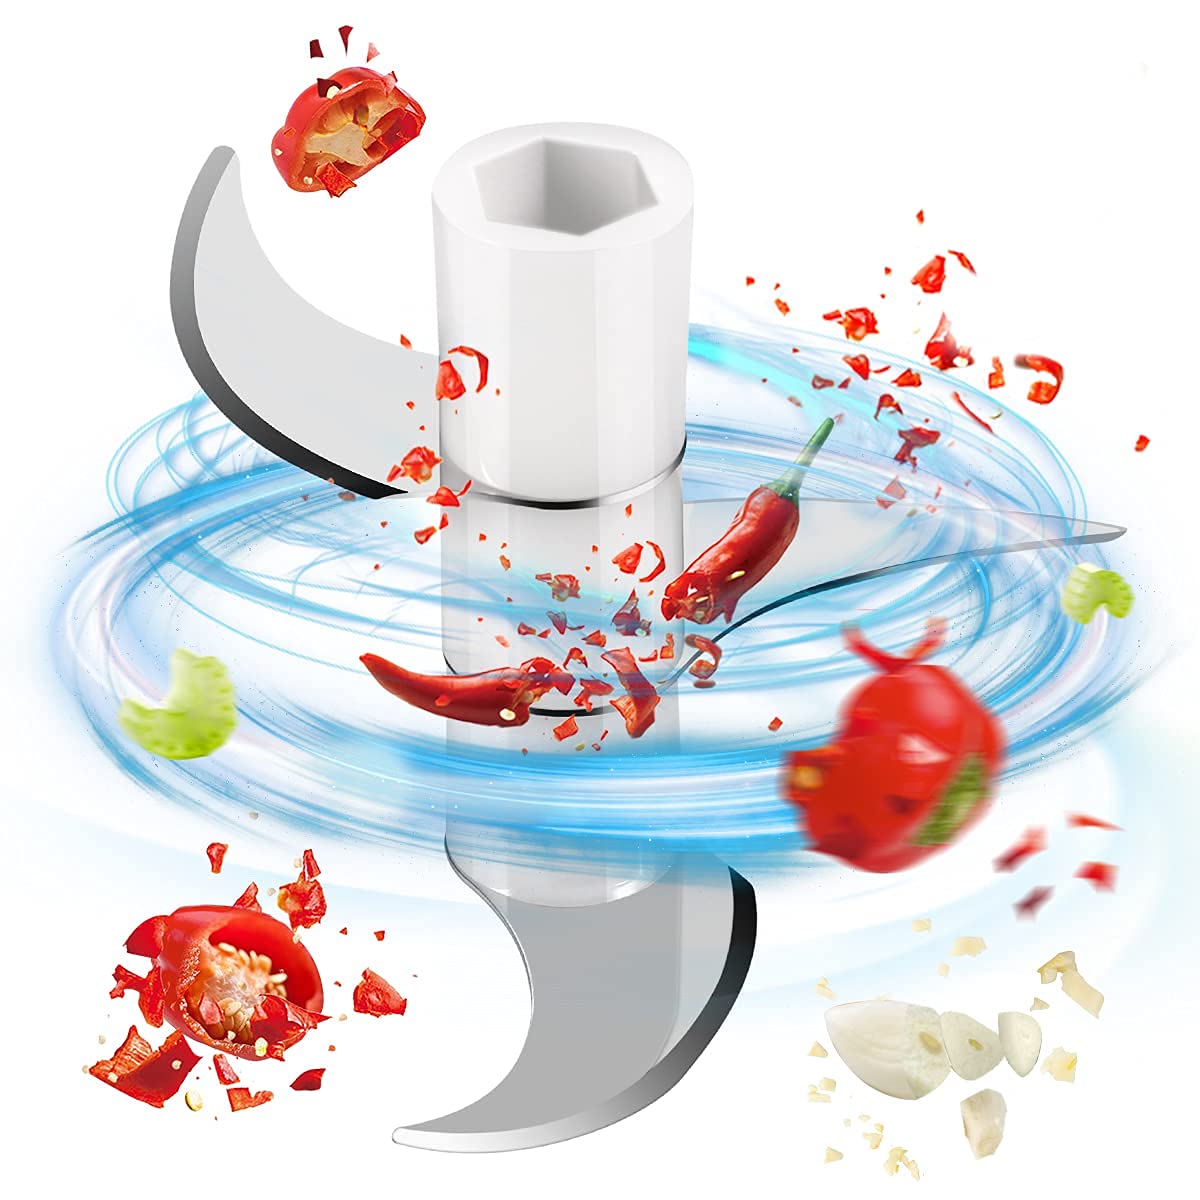 Rechargeable Portable and Cordless Mini Food Processor 250ML with